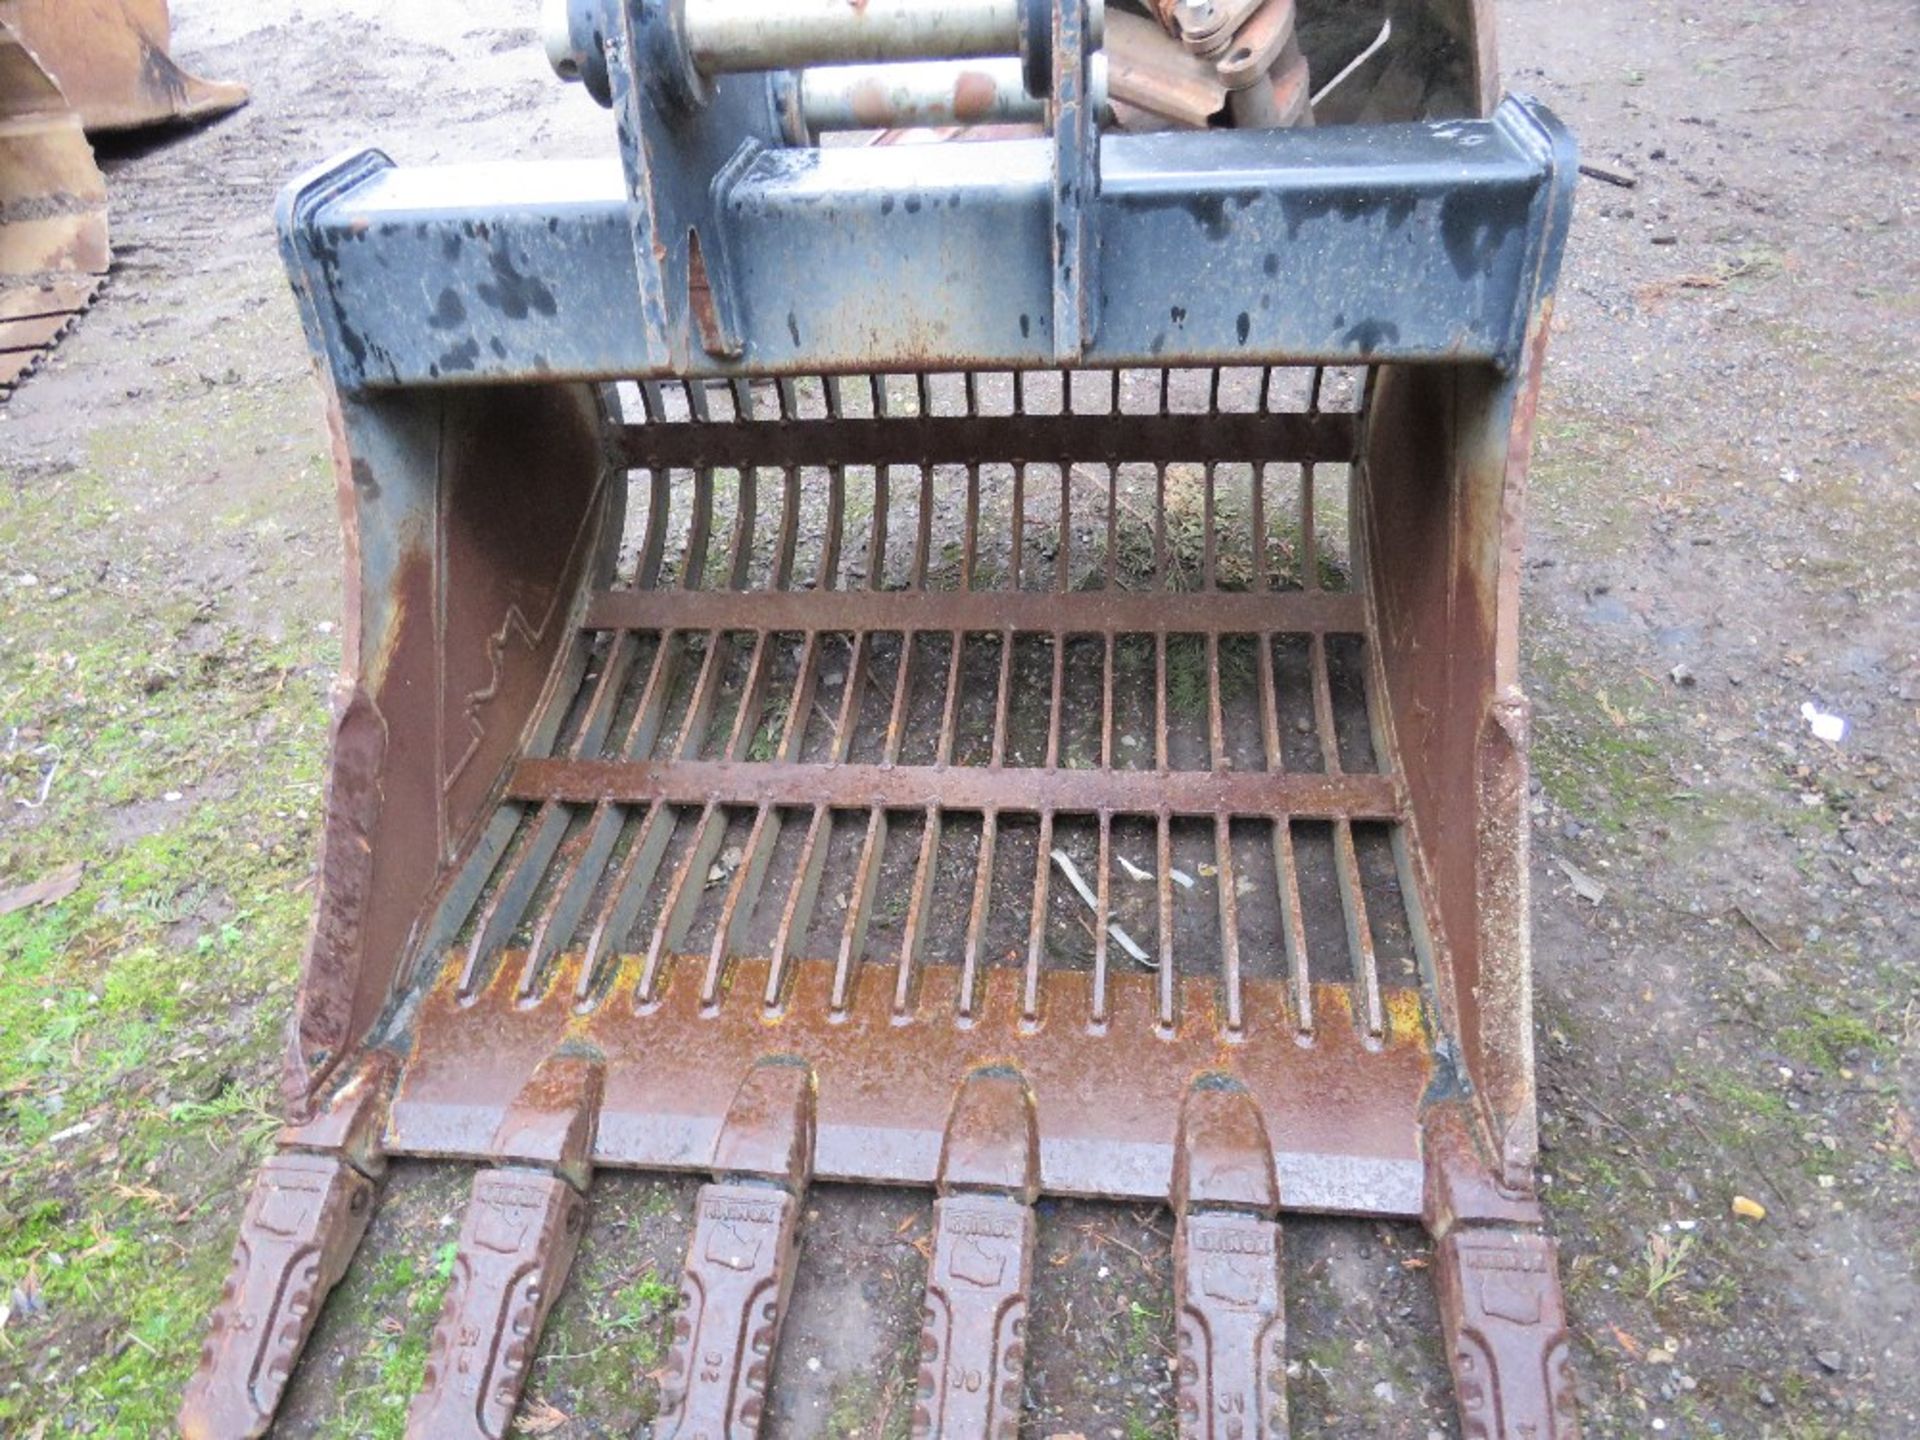 RHINOX 1.2M WIDTH EXCAVATOR MOUNTED RIDDLE BUCKET ON 65MM PINS, LITTLE USED. BEING SOLD AS SURPLUS T - Image 3 of 5